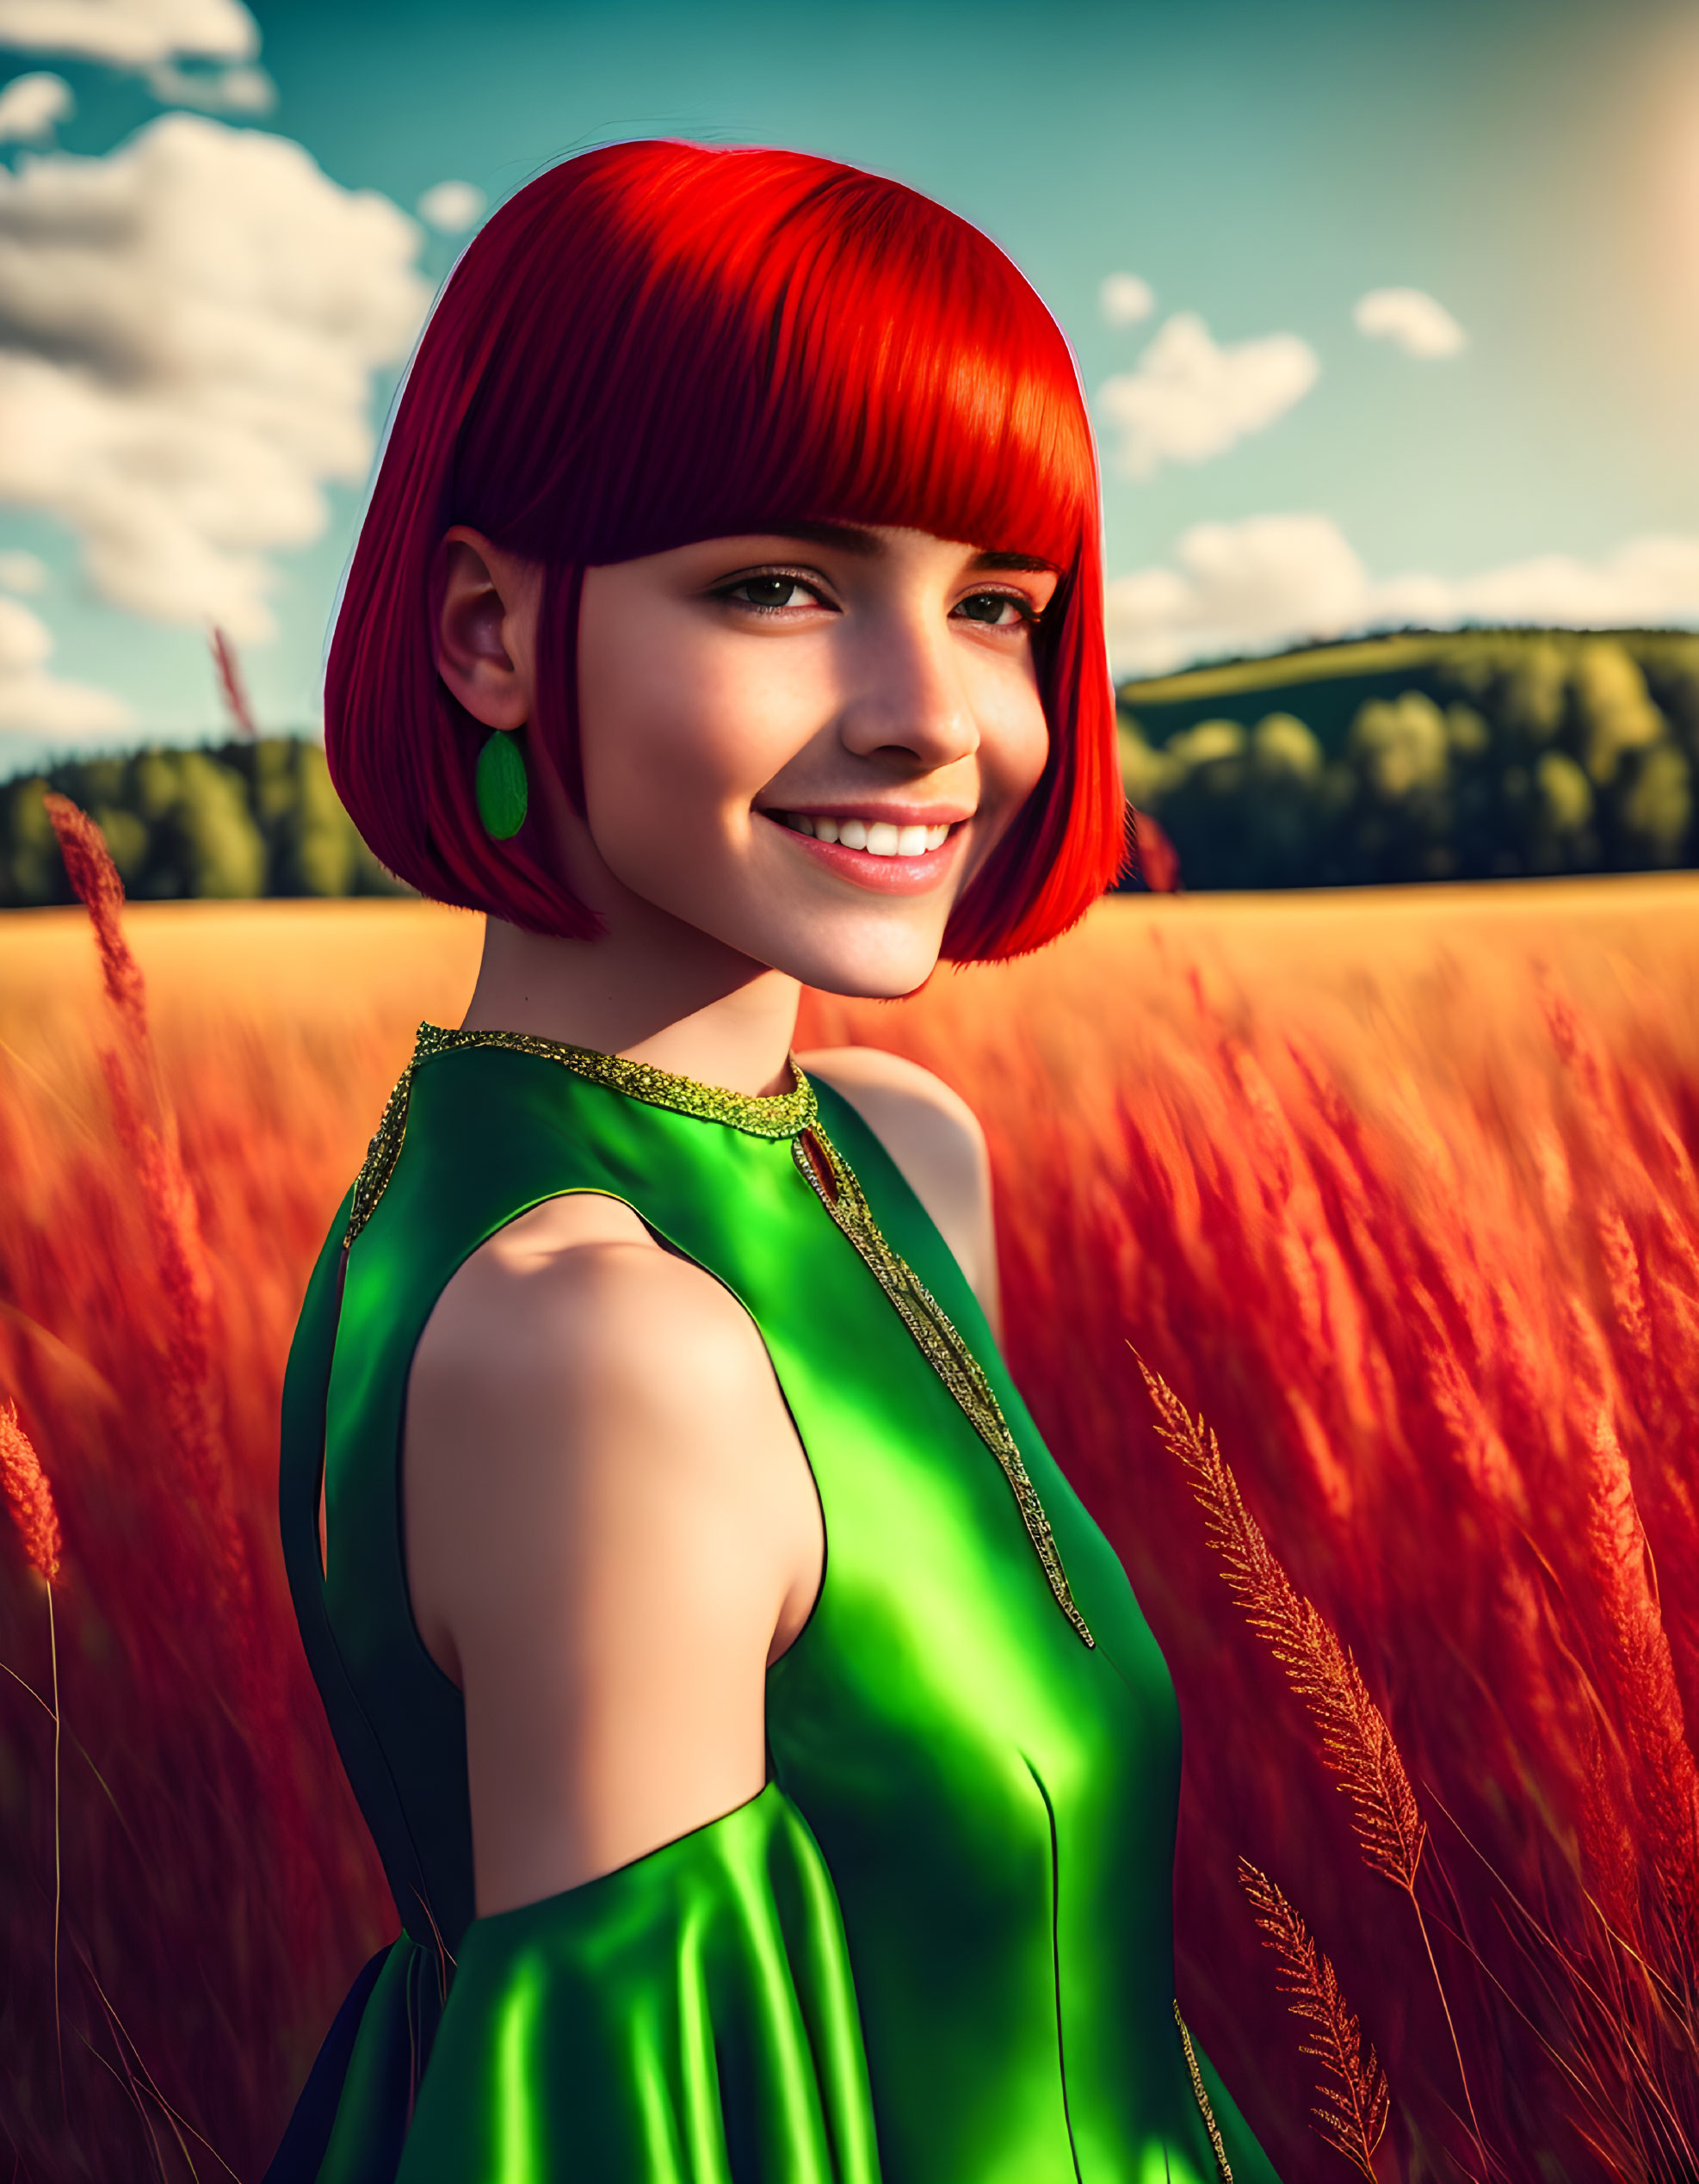 Red-haired woman in green dress standing in sunlit field